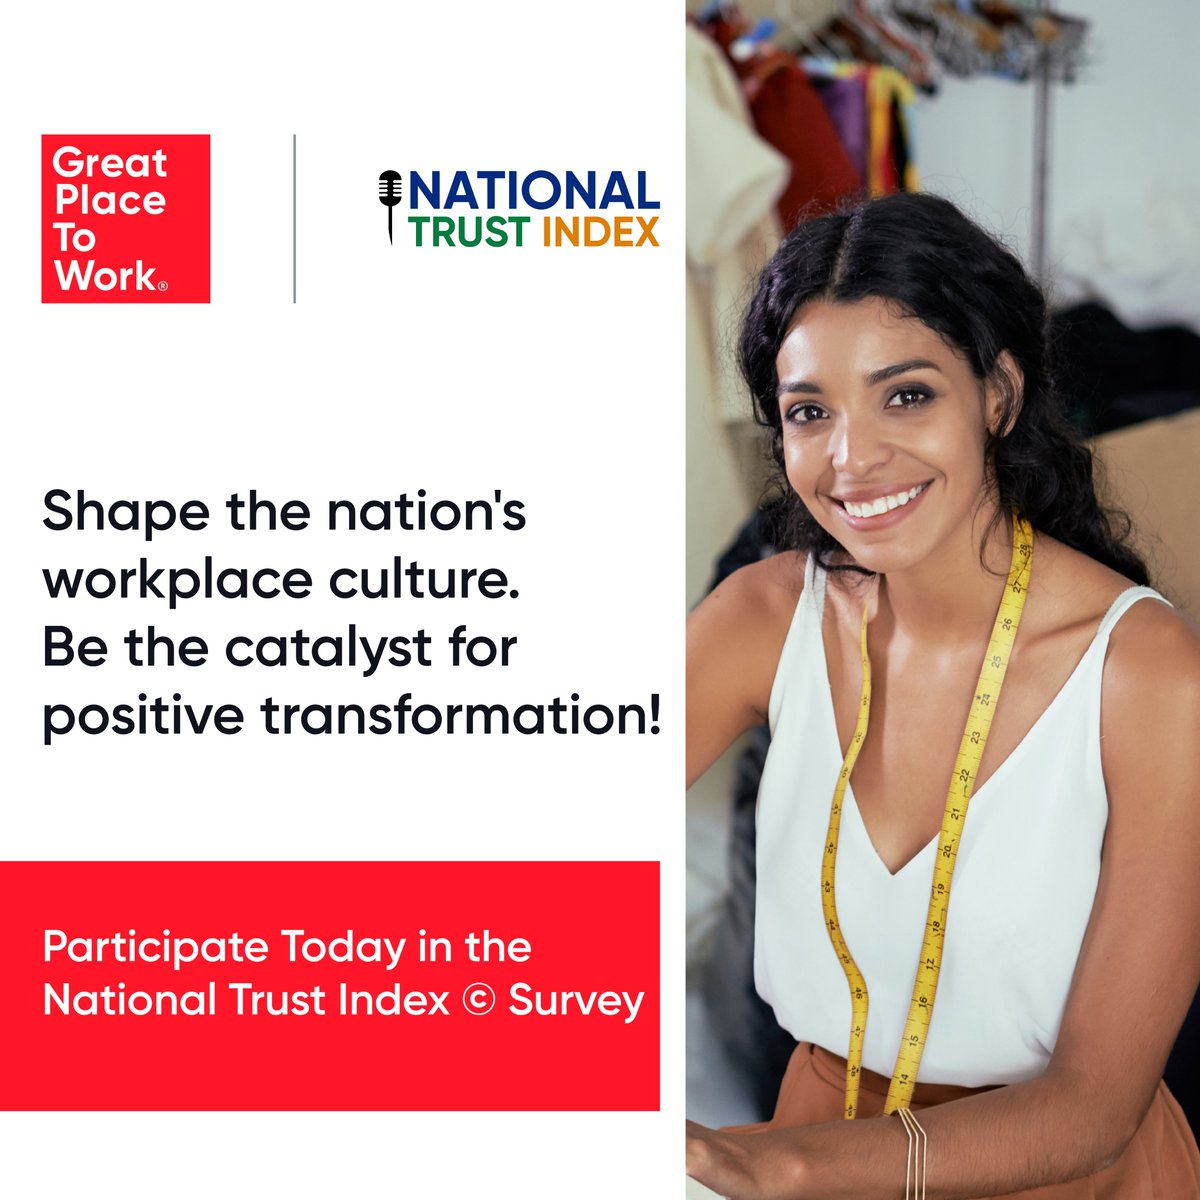 Your Gateway to Workplace Excellence - The National Trust Index© 

Share your voice today to transform the workplace culture in India! 

 Visit us at: bit.ly/481j4Fj

#MakingIndiaAGreatPlaceToWorkForAll #GPTW4ALL #Workplaceculture #NTI #NationalTrustIndex